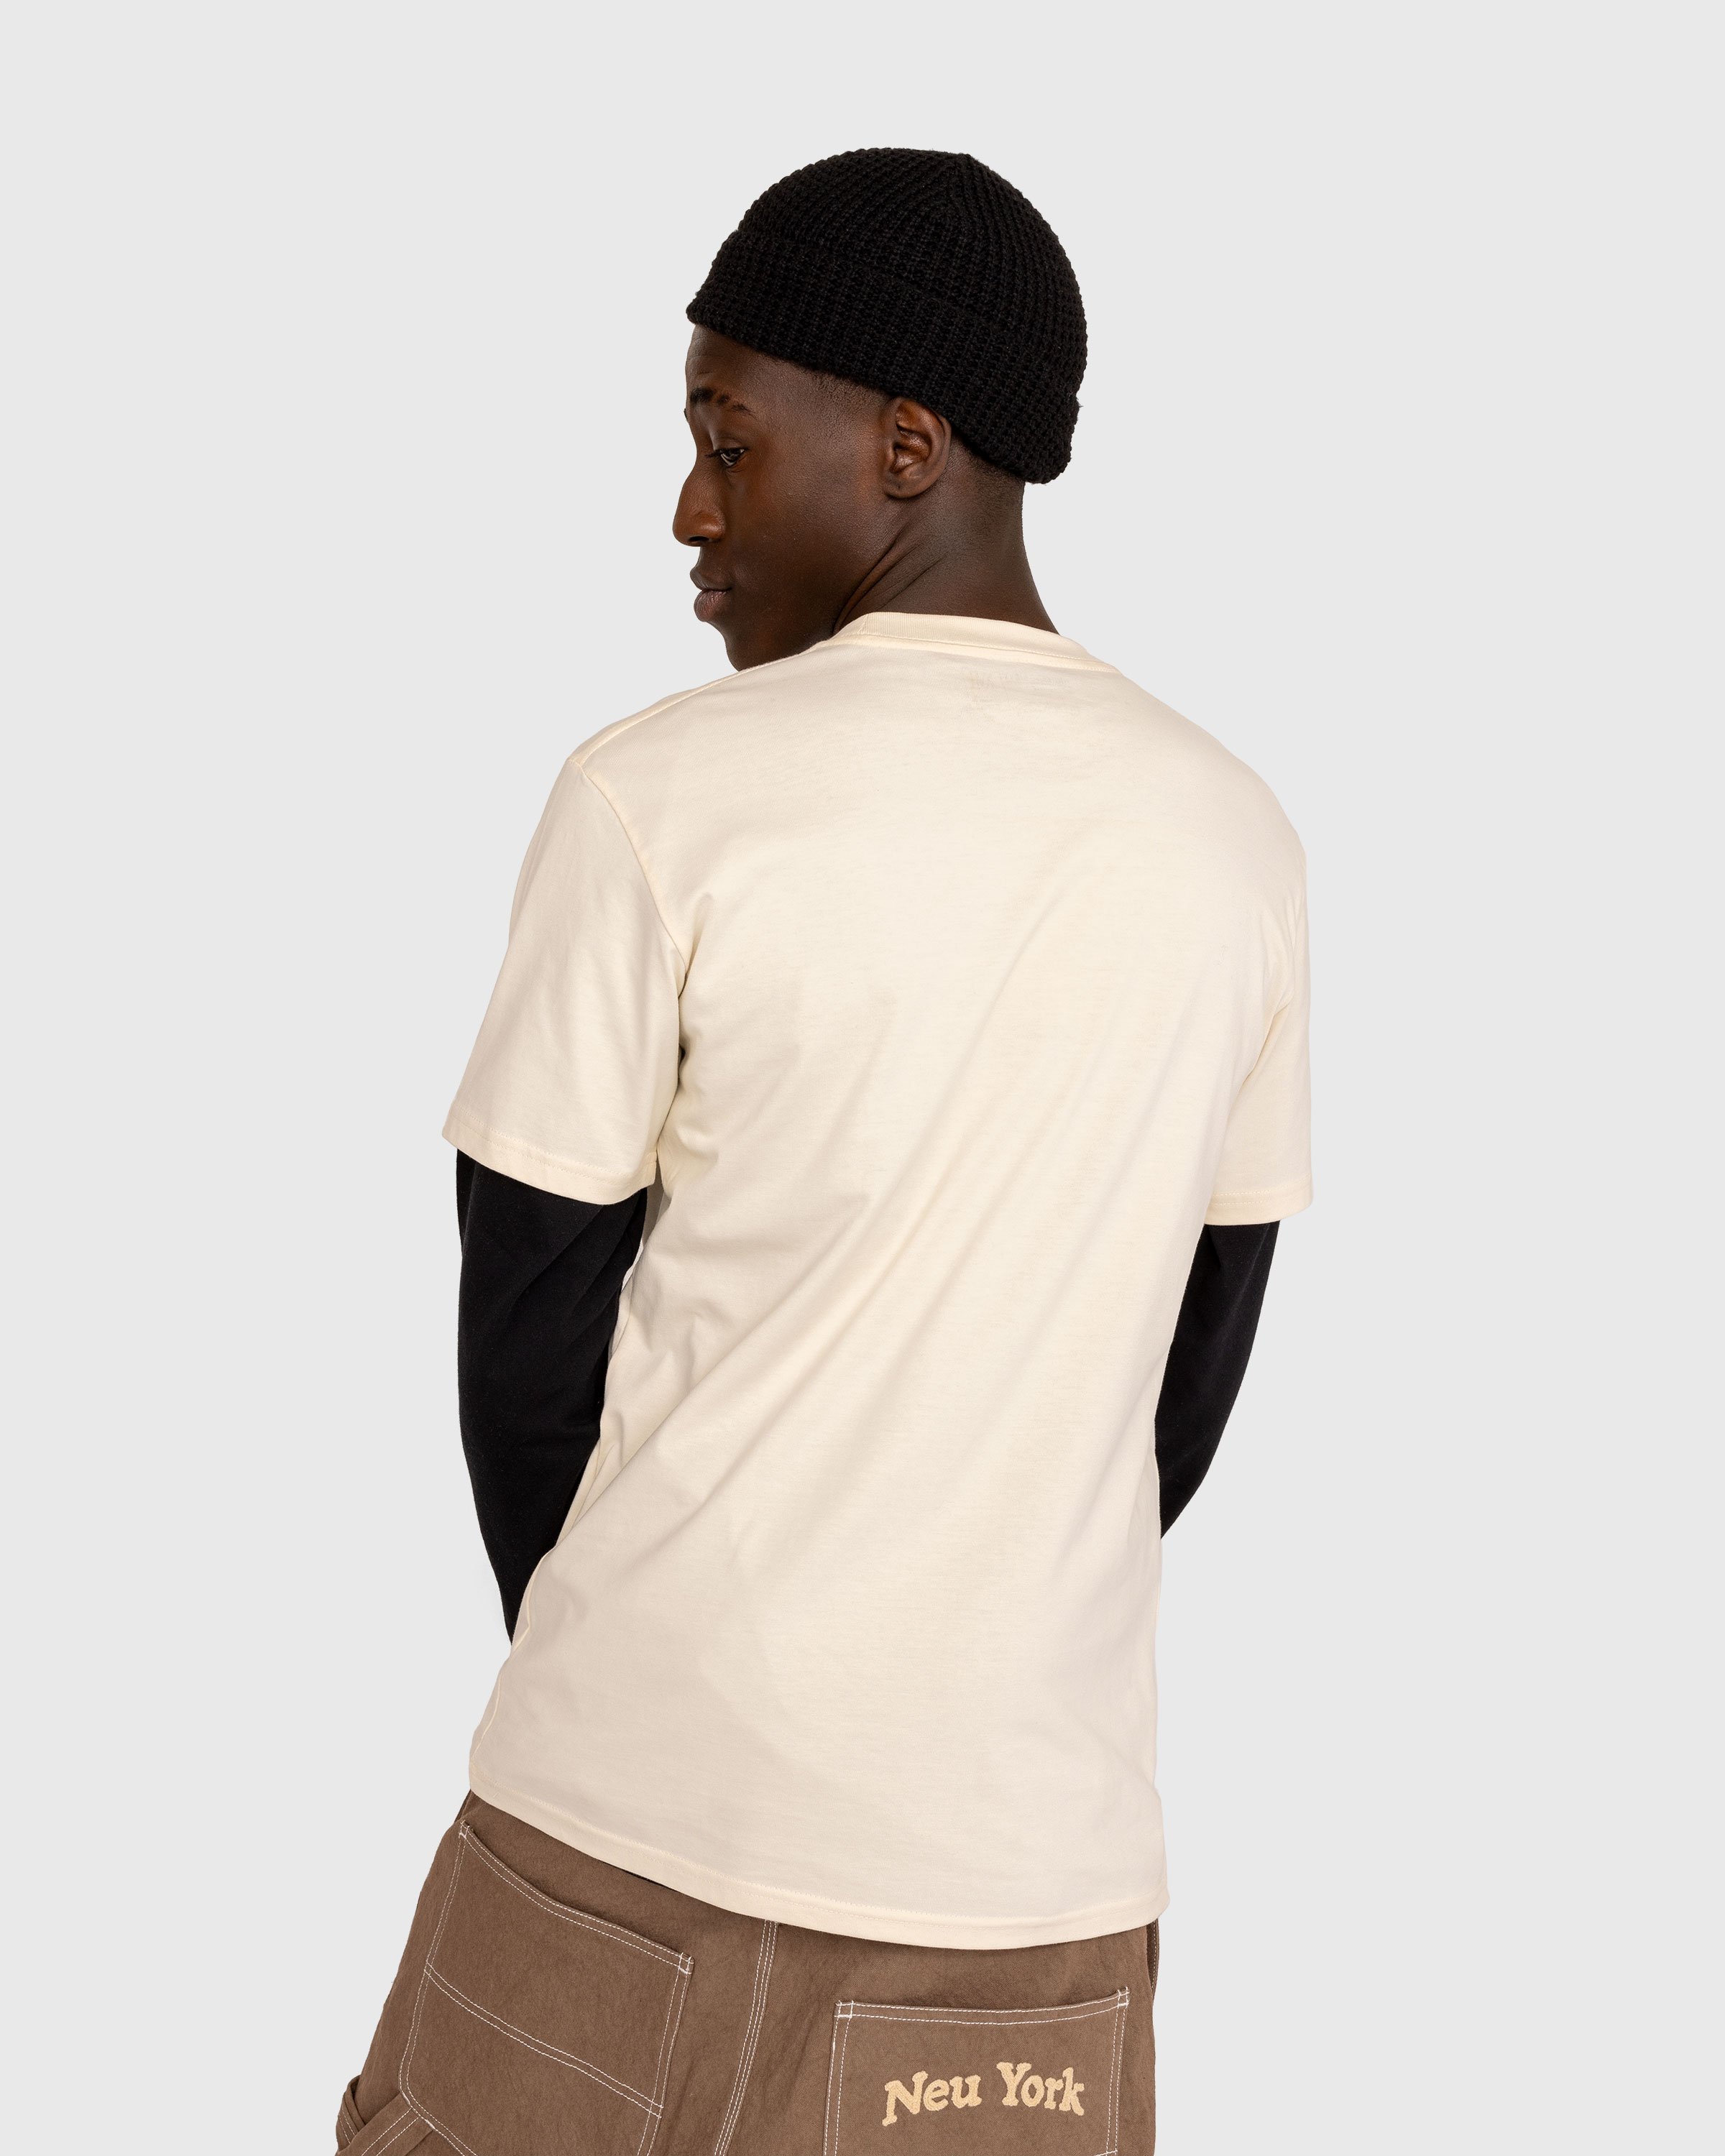 At The Moment x Highsnobiety - New York Rats T-Shirt - Clothing - Beige - Image 4